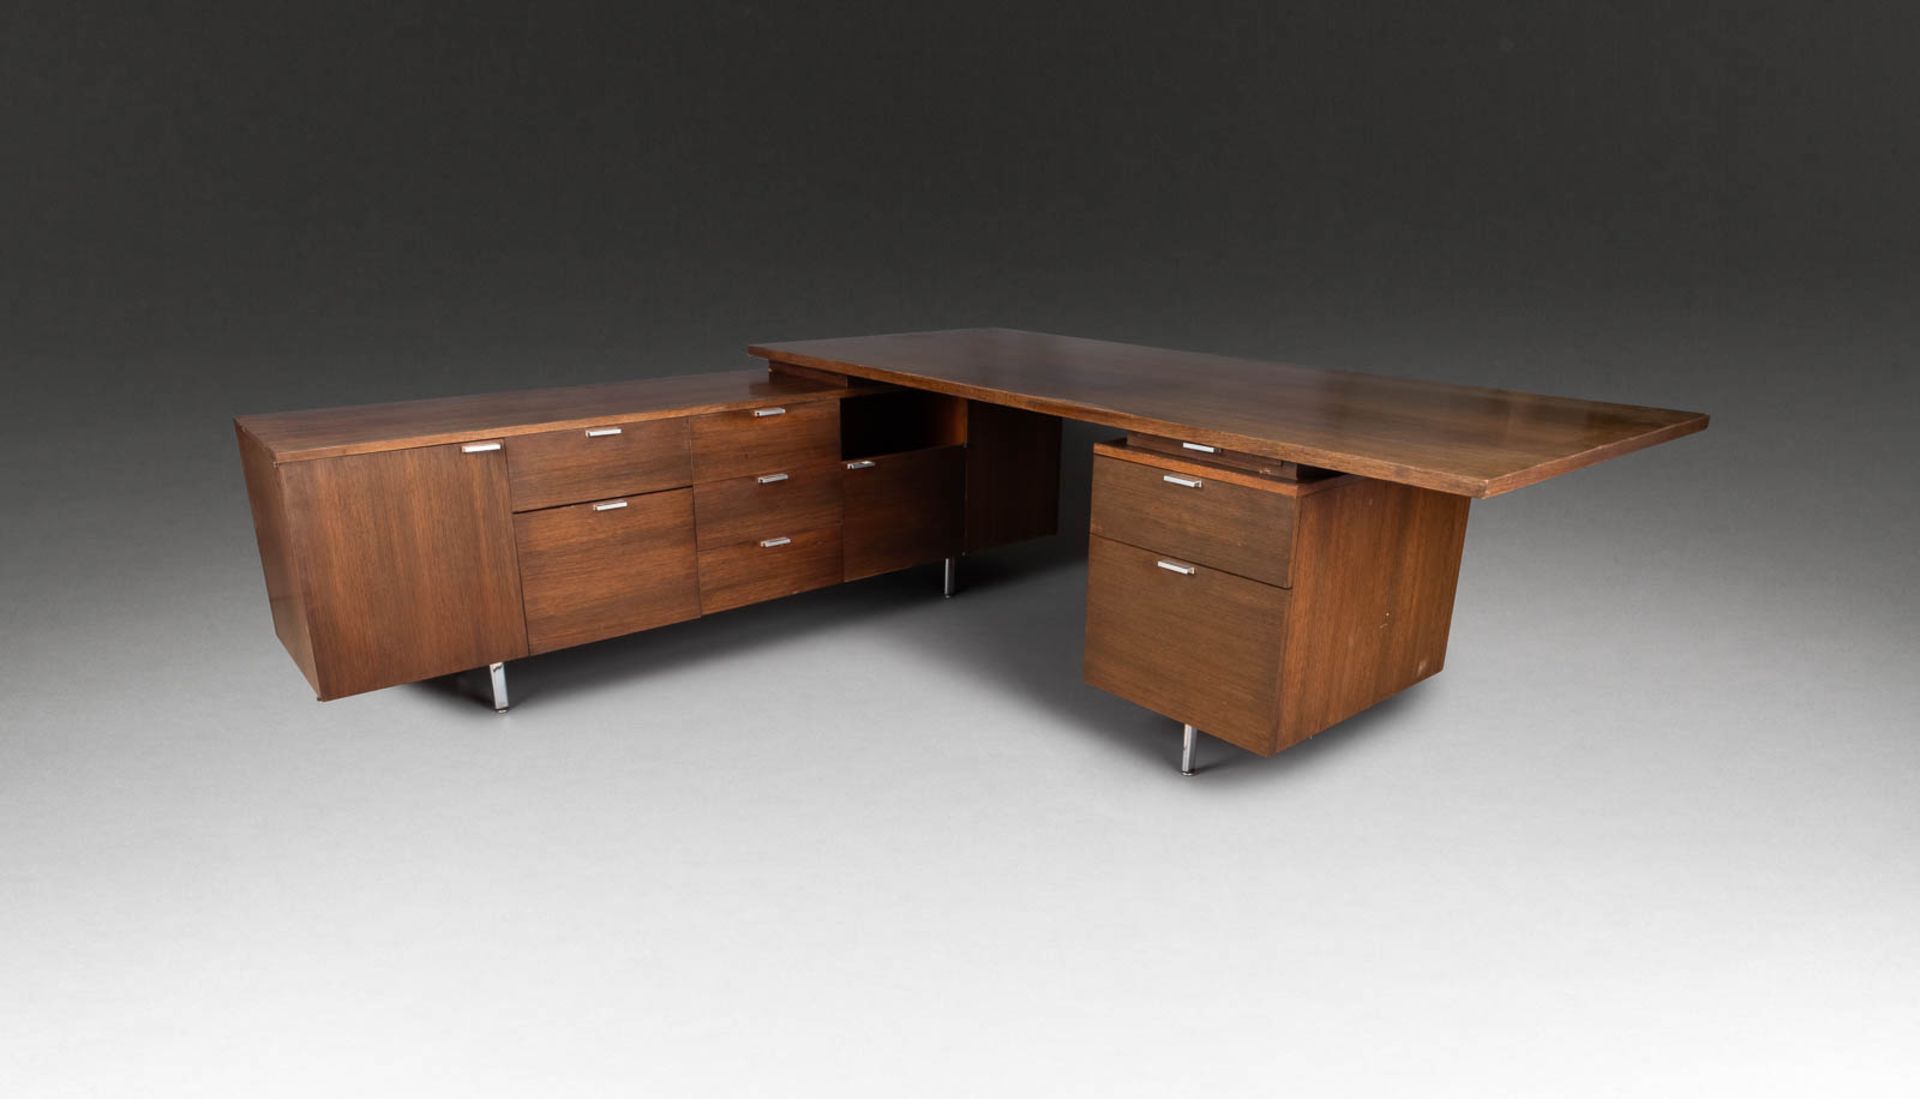 GEORGE NELSON1908 Hartford, Connecticut - 1986 New York City 'EXECUTIVE OFFICE DESK' USA, for Herman